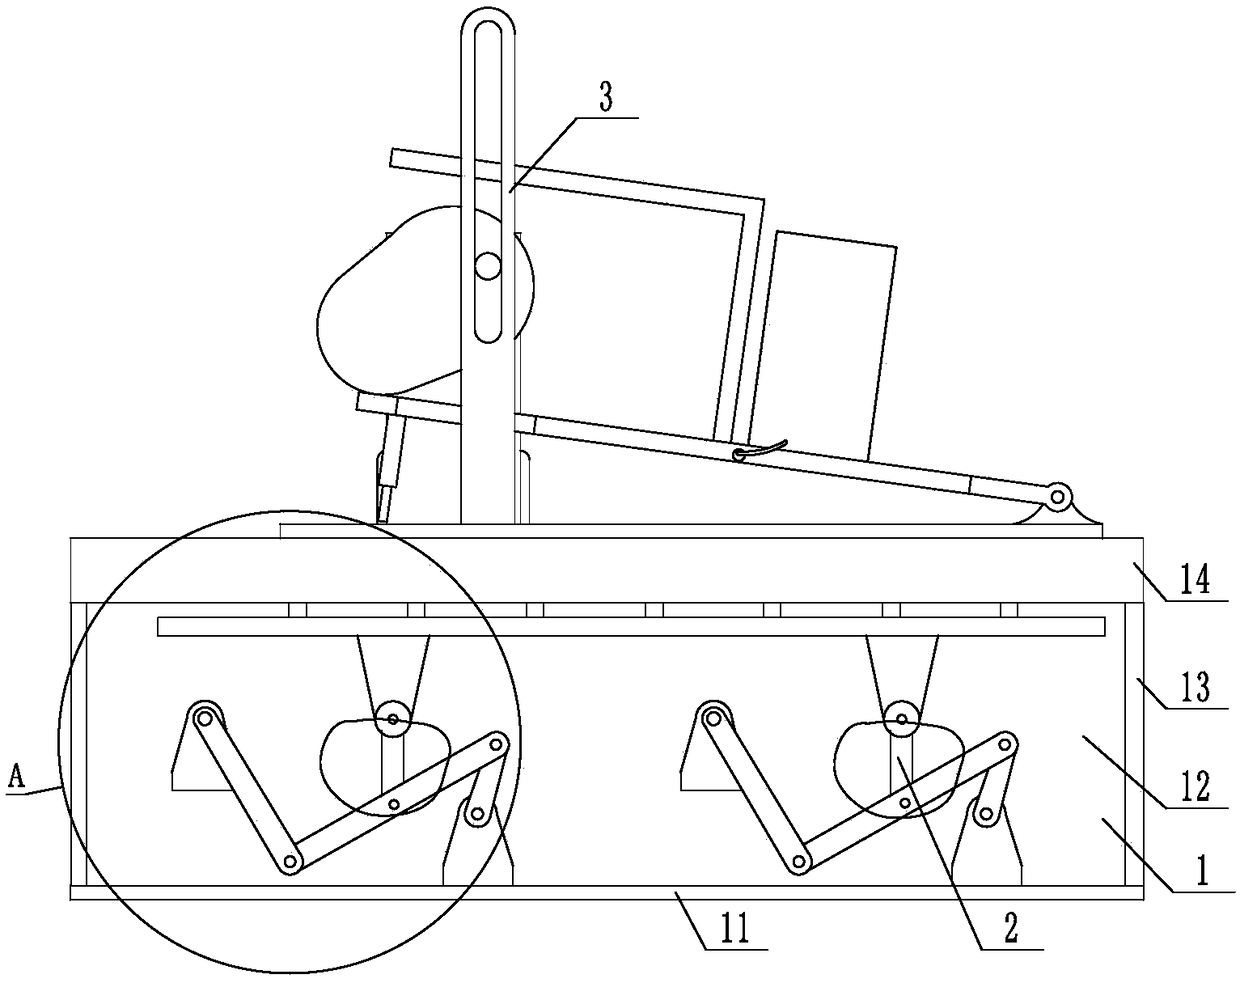 Accounting bill gluing device